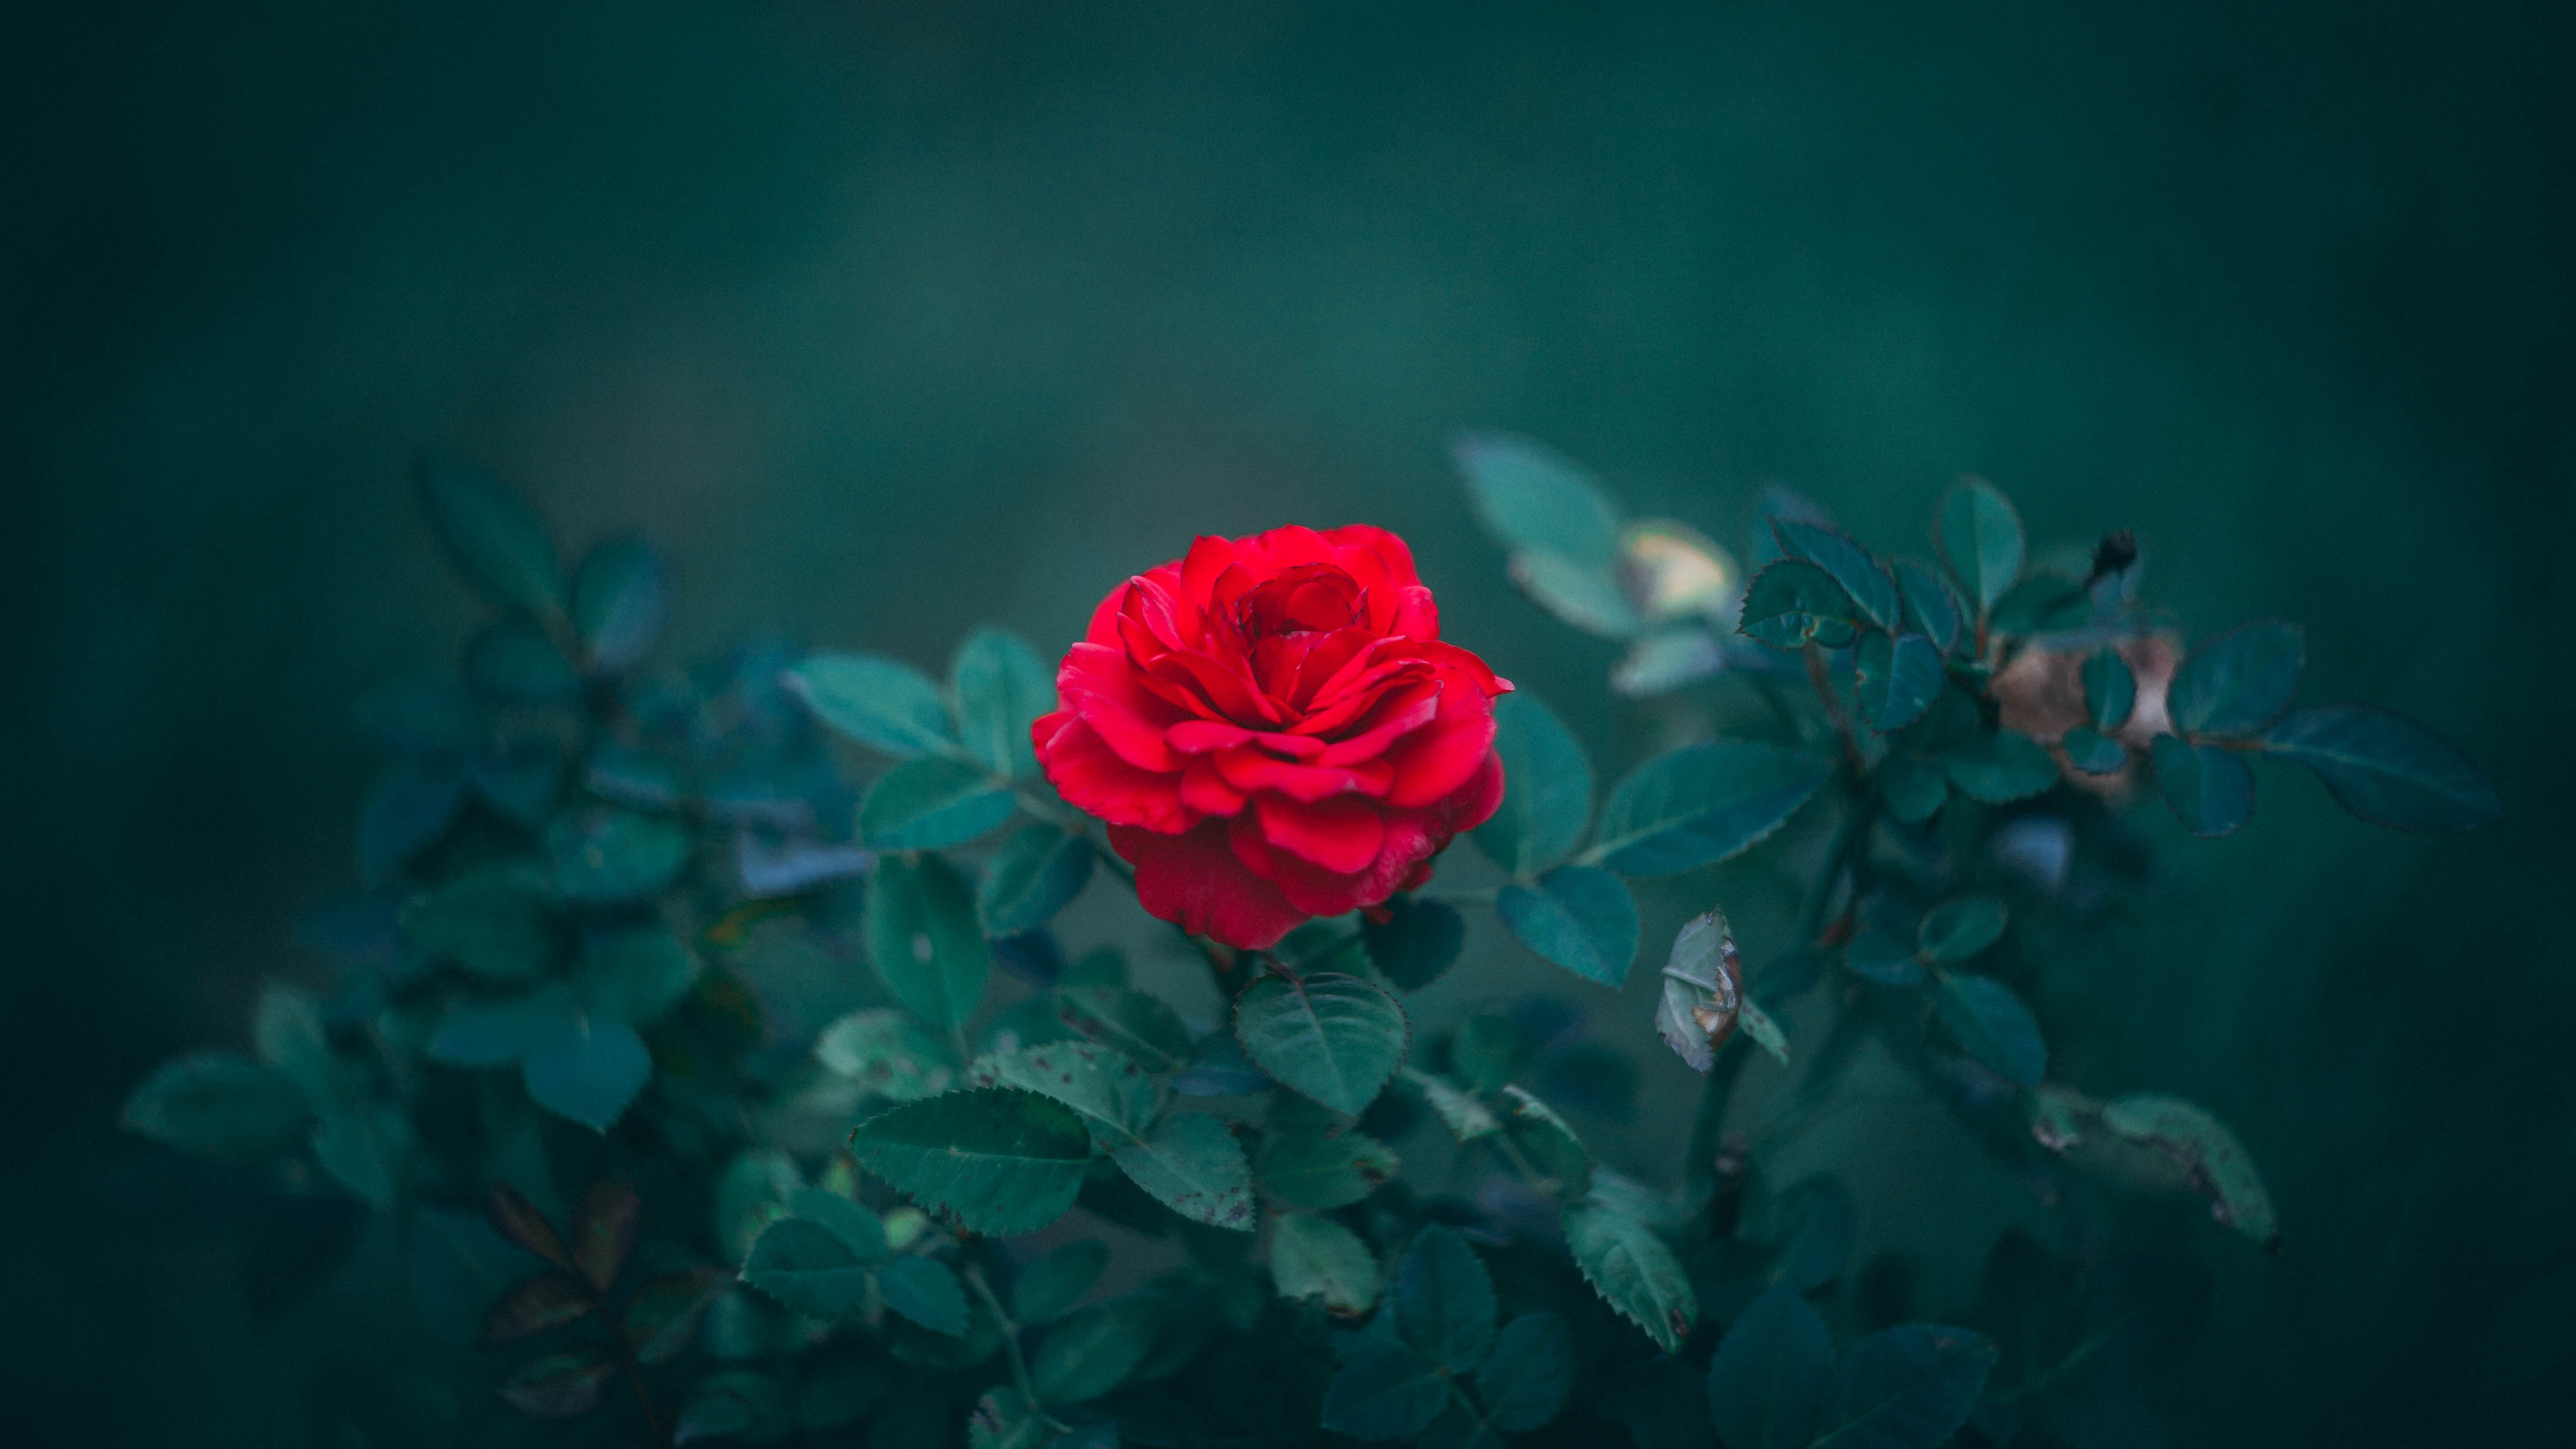 smooth, bud, leaves, rose flower, red, flowers, bush, rose, blur Free Stock Photo